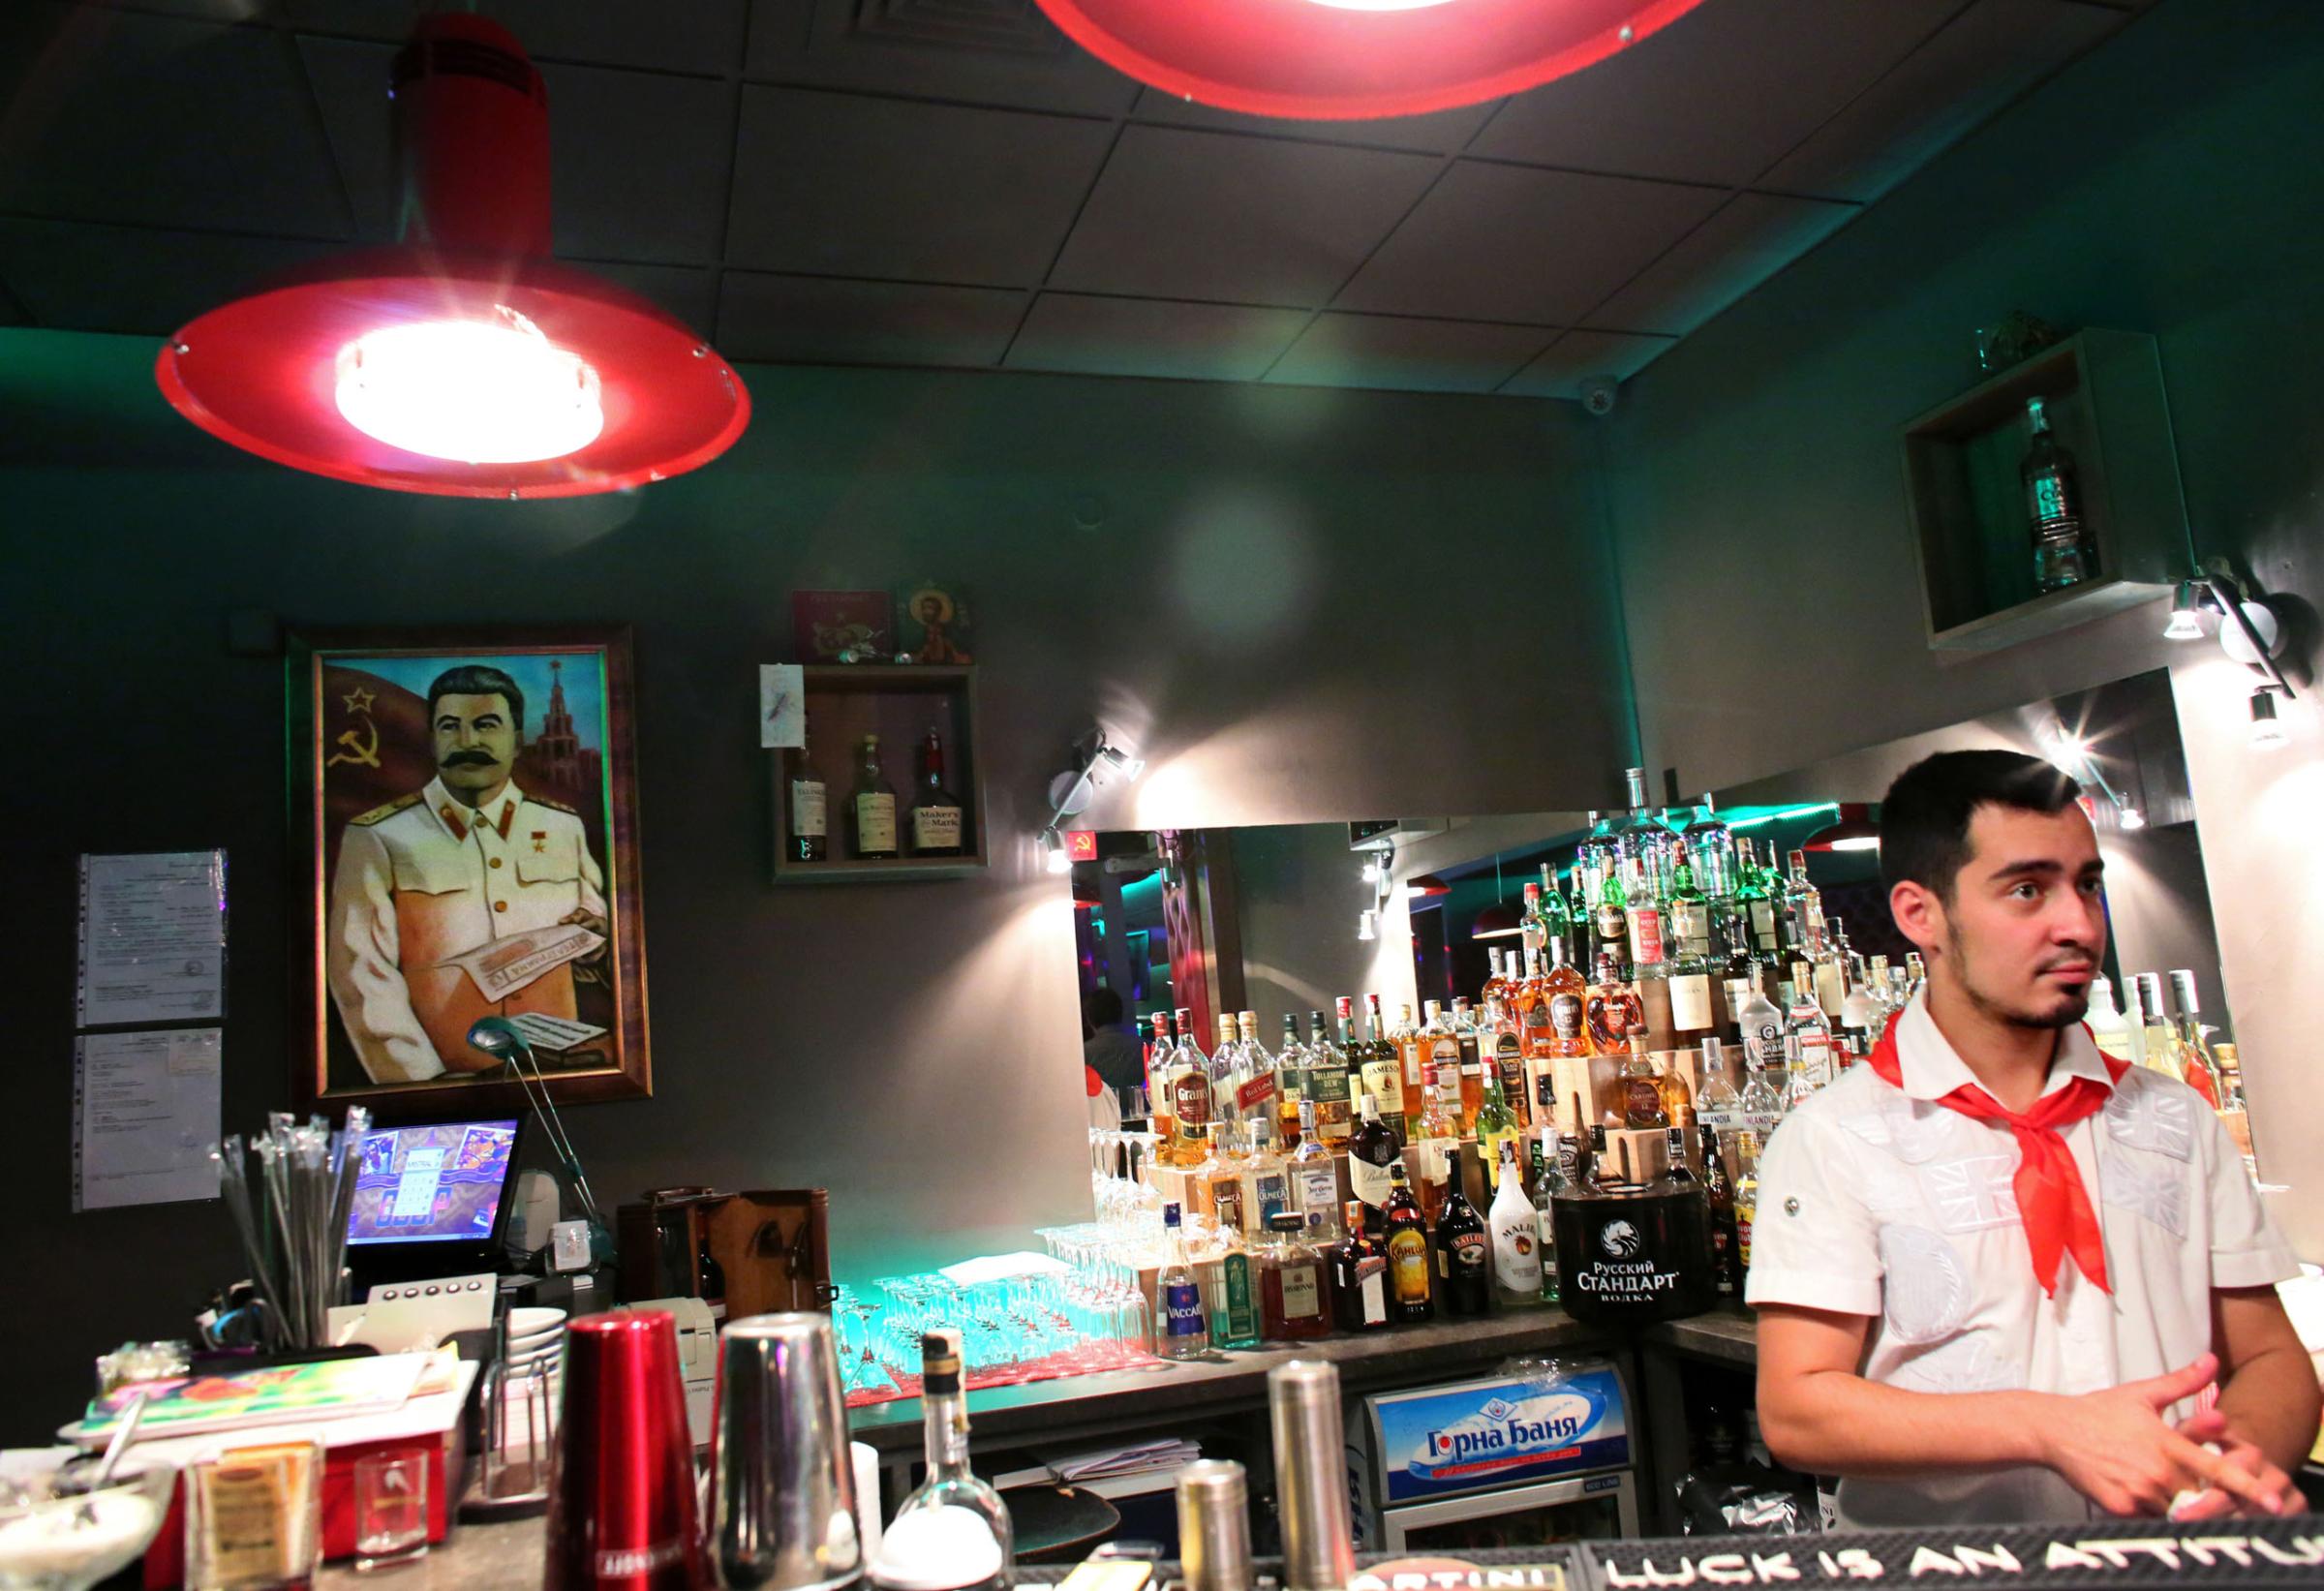 Kristiyan Stamatov serves drinks at SSSR, a USSR nostalgia restaurant and bar in Bulgaria's capital Sofia, in front of a portrait of Soviet communist leader Joseph Stalin, on October 4th, 2014. Stamatov is wearing a red tie, symbolic of what was once called a "pionerche" (pioneer,) or a Bulgarian student expected to serve the country and Communist party. This photo is from a project that aims to gauge the state and effect of democracy in the former Soviet satellite nation Bulgaria, two and a half decades after the fall of the Berlin Wall. The story of democracy in Bulgaria at age 25 is a cautionary tale about transplanting one-size-fits-all Western values to a nation still undergoing social and economic upheaval. Bulgaria is still one of the poorest, most corrupt nations in the European Union, its post-1989 hopes wilted by political instability, high crime rates and skyrocketing inflation. While Bulgarians can now freely vote and protest without much threat to their freedom, their new oppressor is corruption - which is at a 15 year high, across political and civil sectors alike. The ennui is so casually etched on the passerby's face that it becomes routine - one that fits in sadly well against a startling backdrop of rotting architecture, joblessness, and a vast population decline. Despite what democracy has changed in Bulgaria, the daily struggles of its populace remain largely untouched, trapped in a post-communist time capsule.This project was supported by a grant from The Pulitzer Center on Crisis Reporting. Photo by: Yana PaskovaCopyright © Yana Paskova 2014